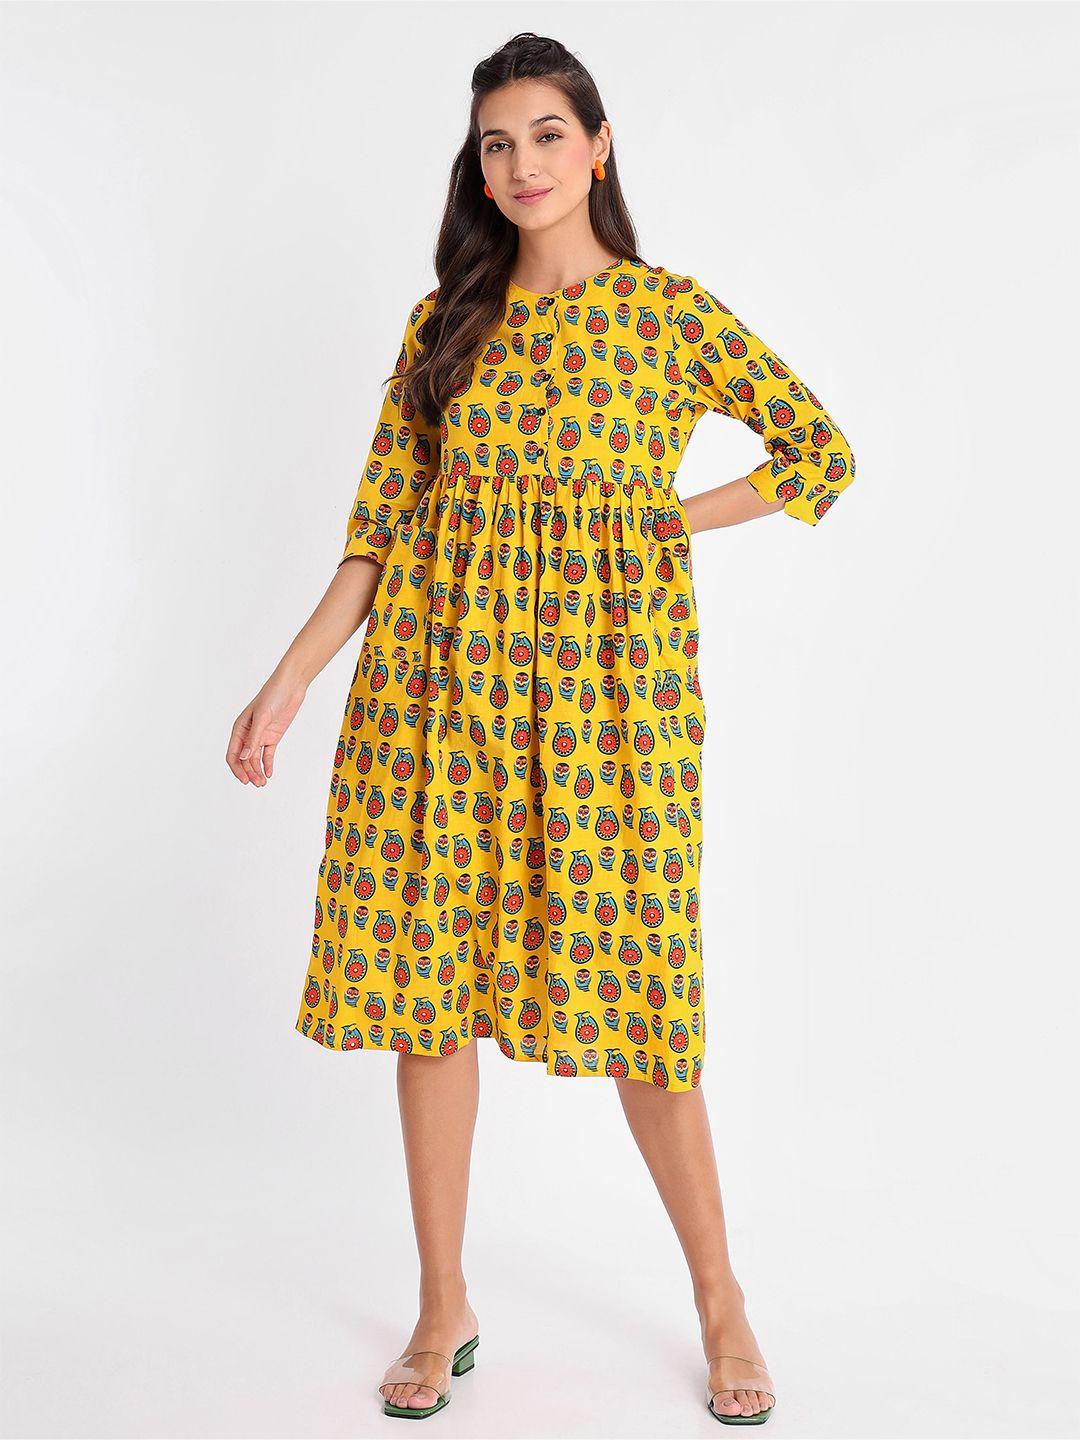 beyoung ethnic motifs printed gathered or pleated cotton fit & flare ethnic dress